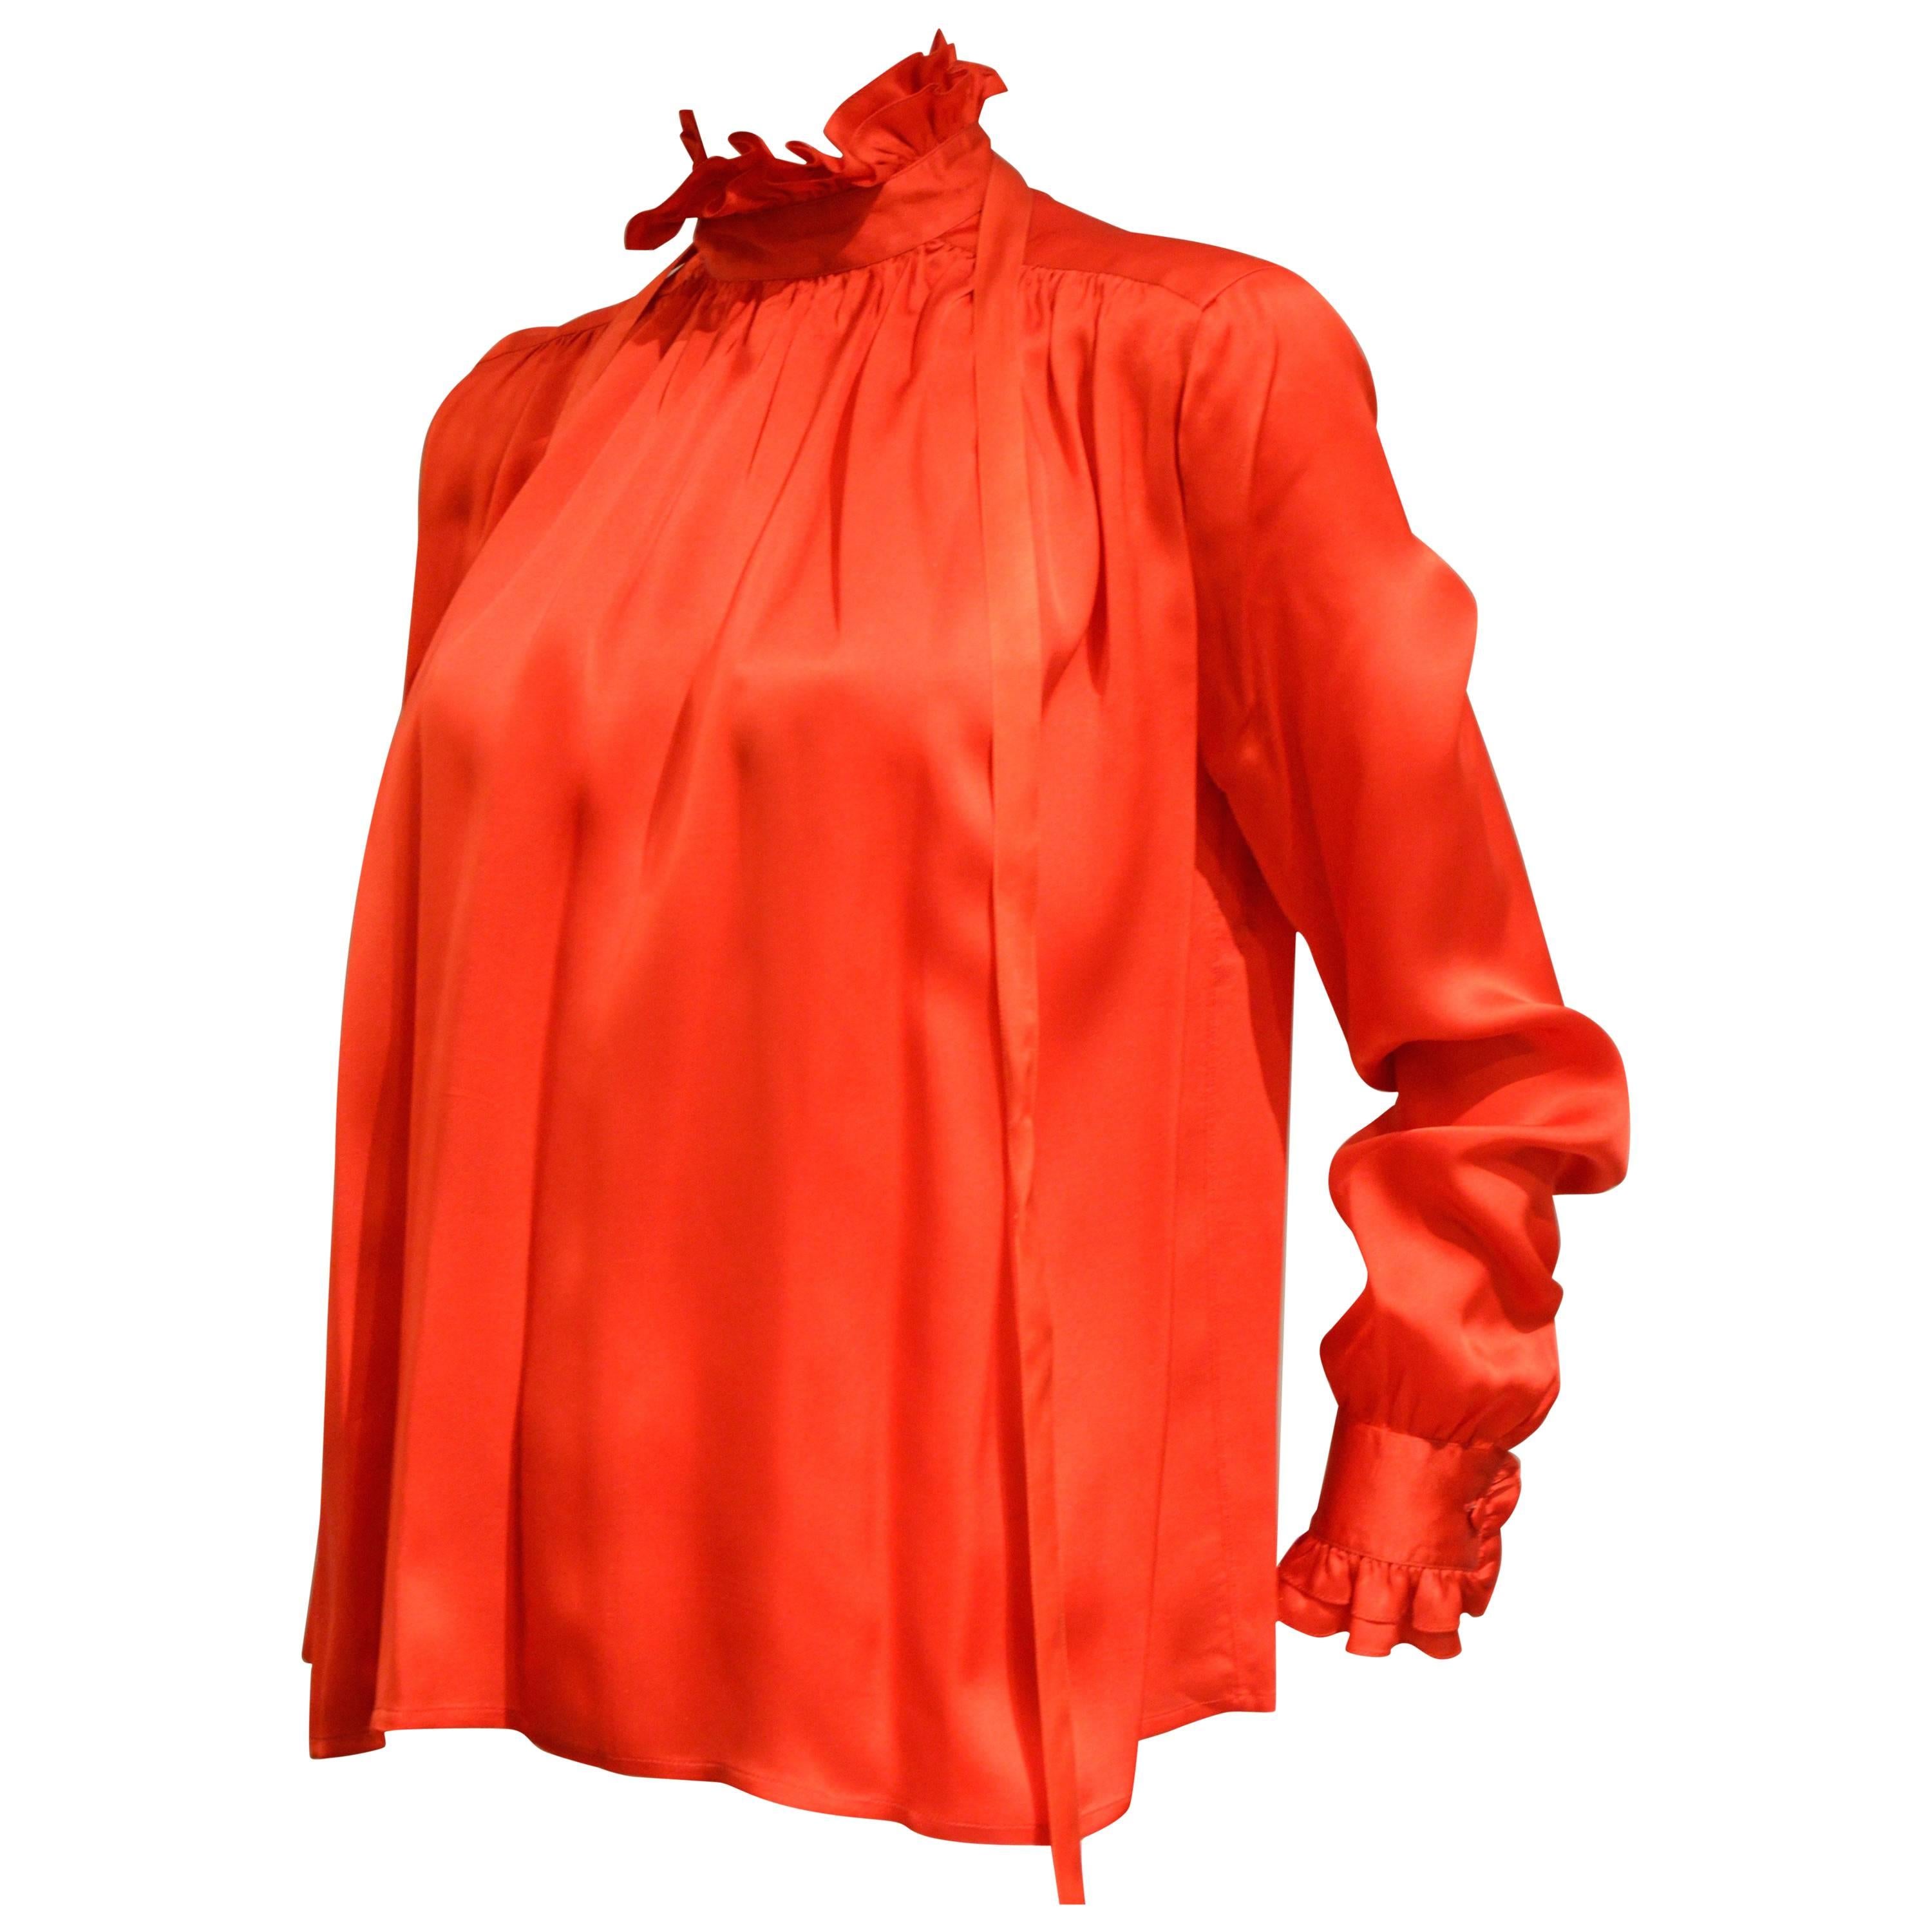 Gorgeous 1990s Chanel Vivid Red Silk Blouse For Sale